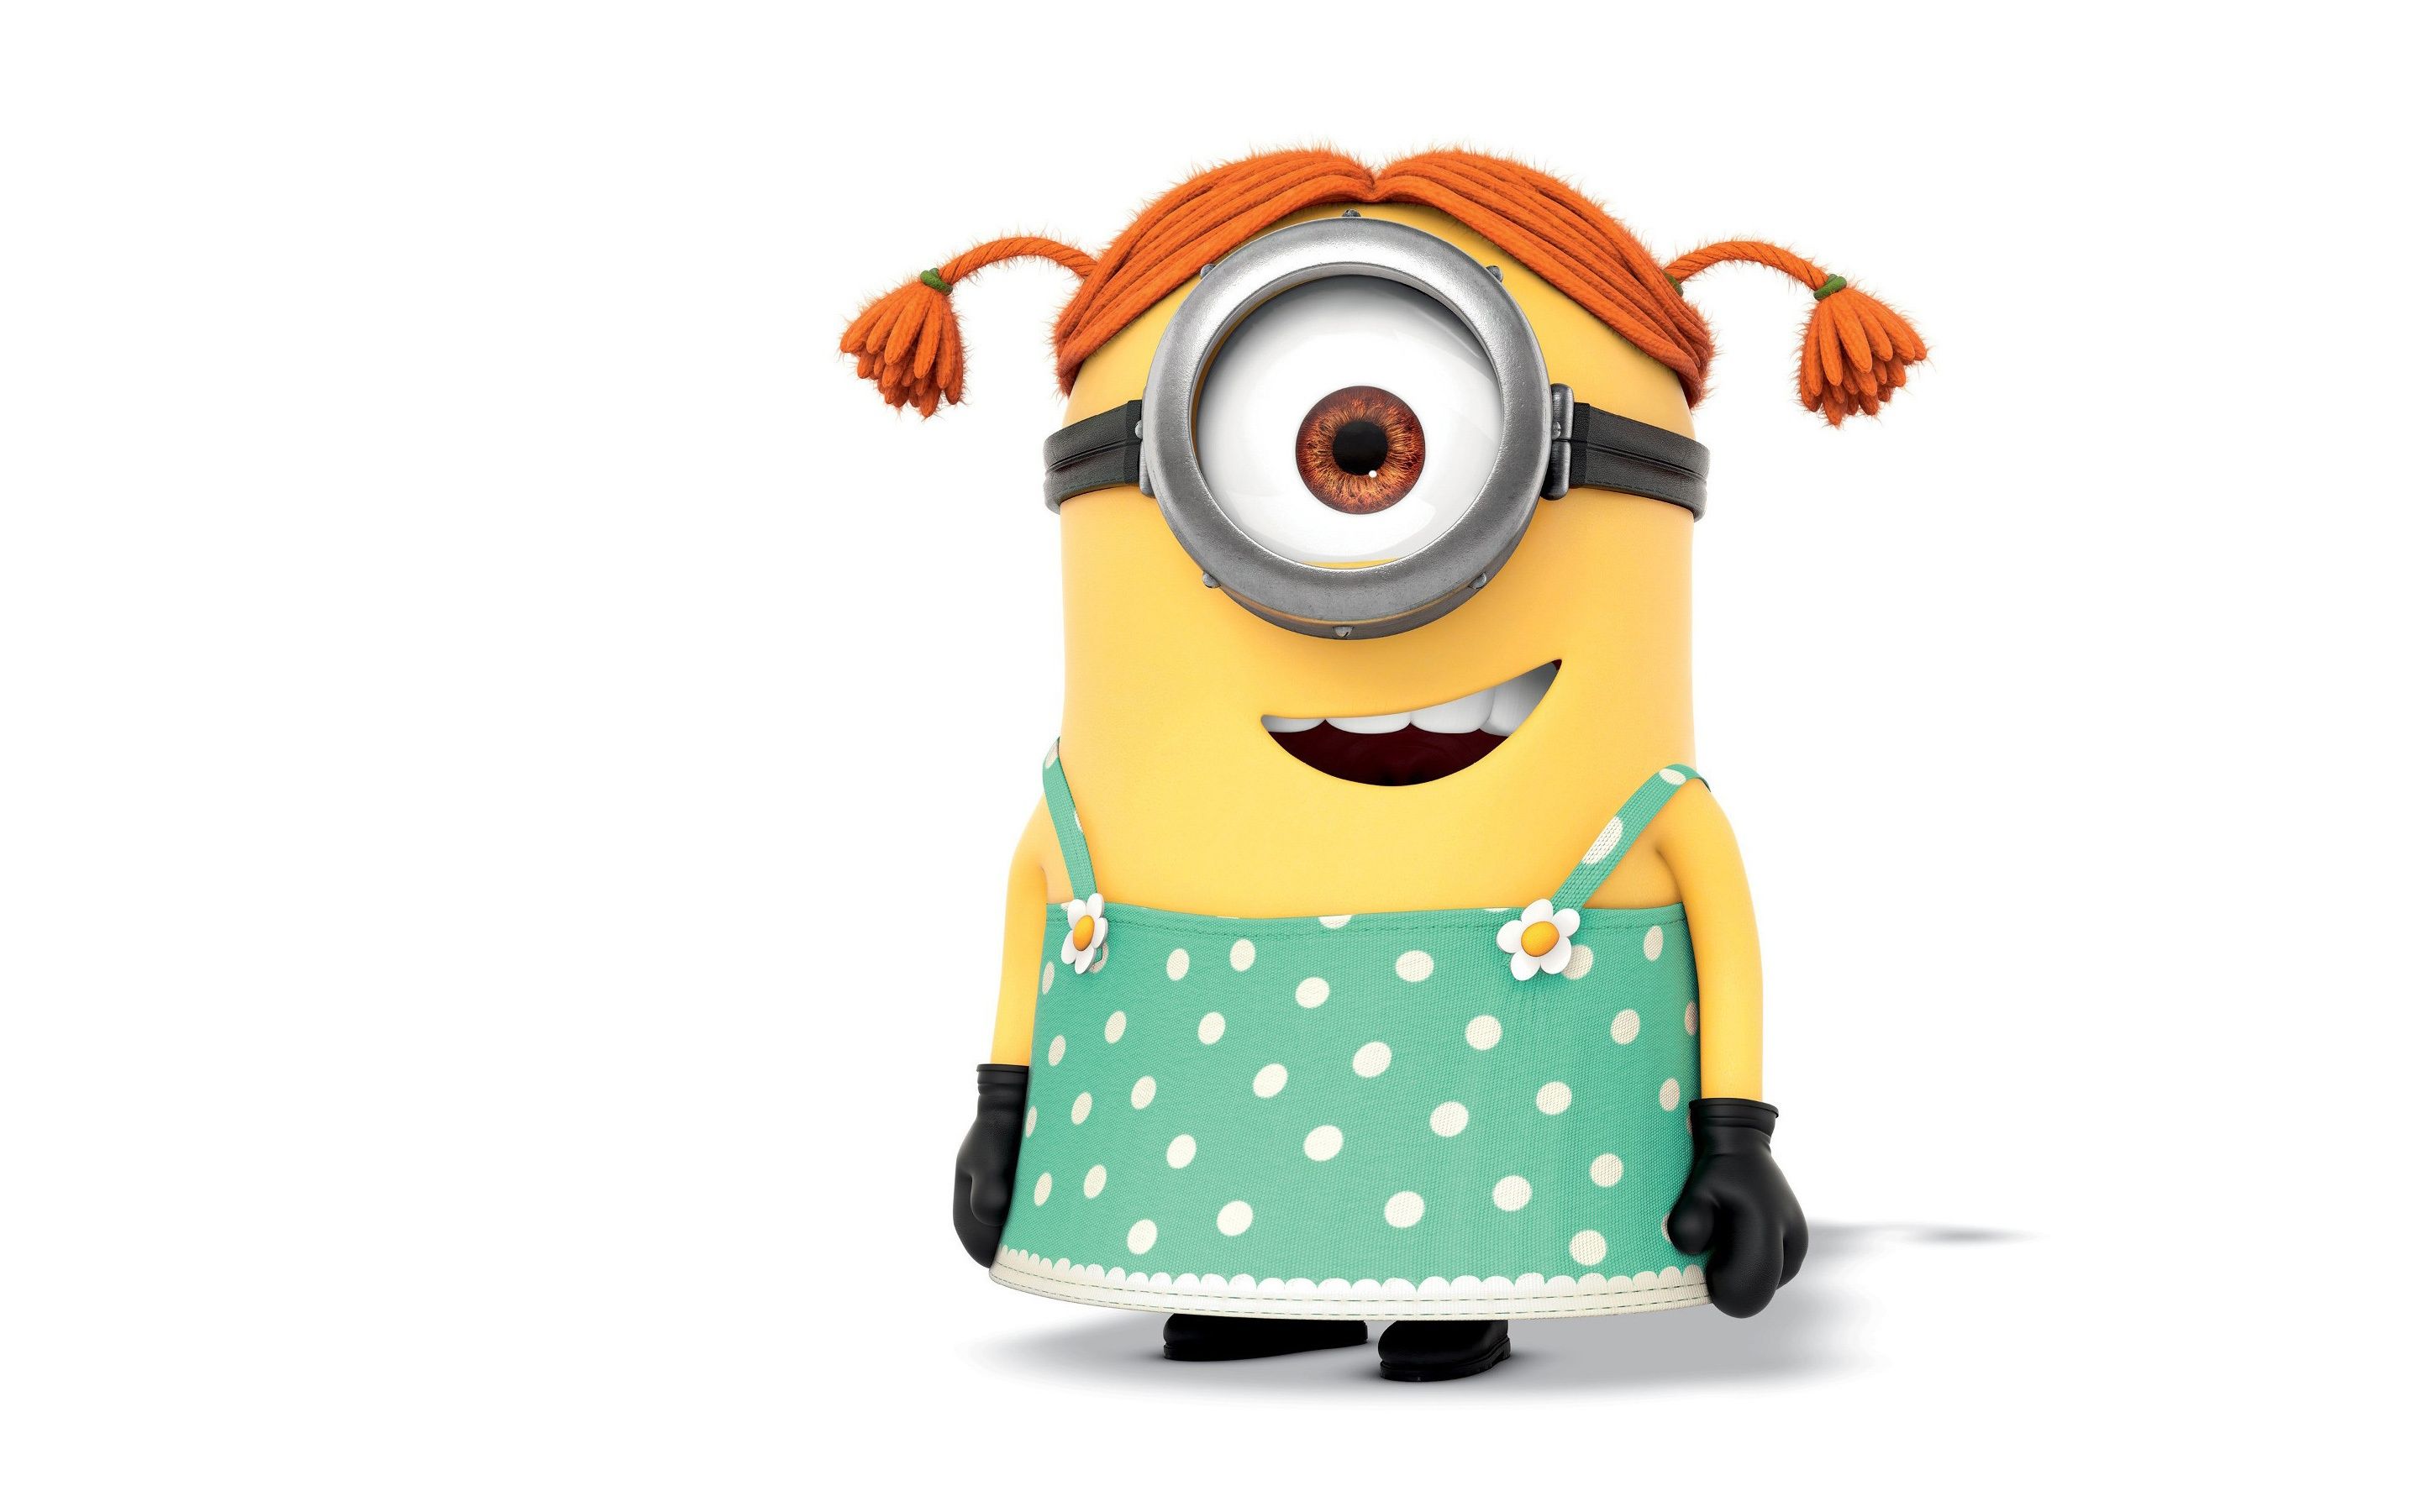 HD Minion Wallpaper For Mobile Phones Techbeasts